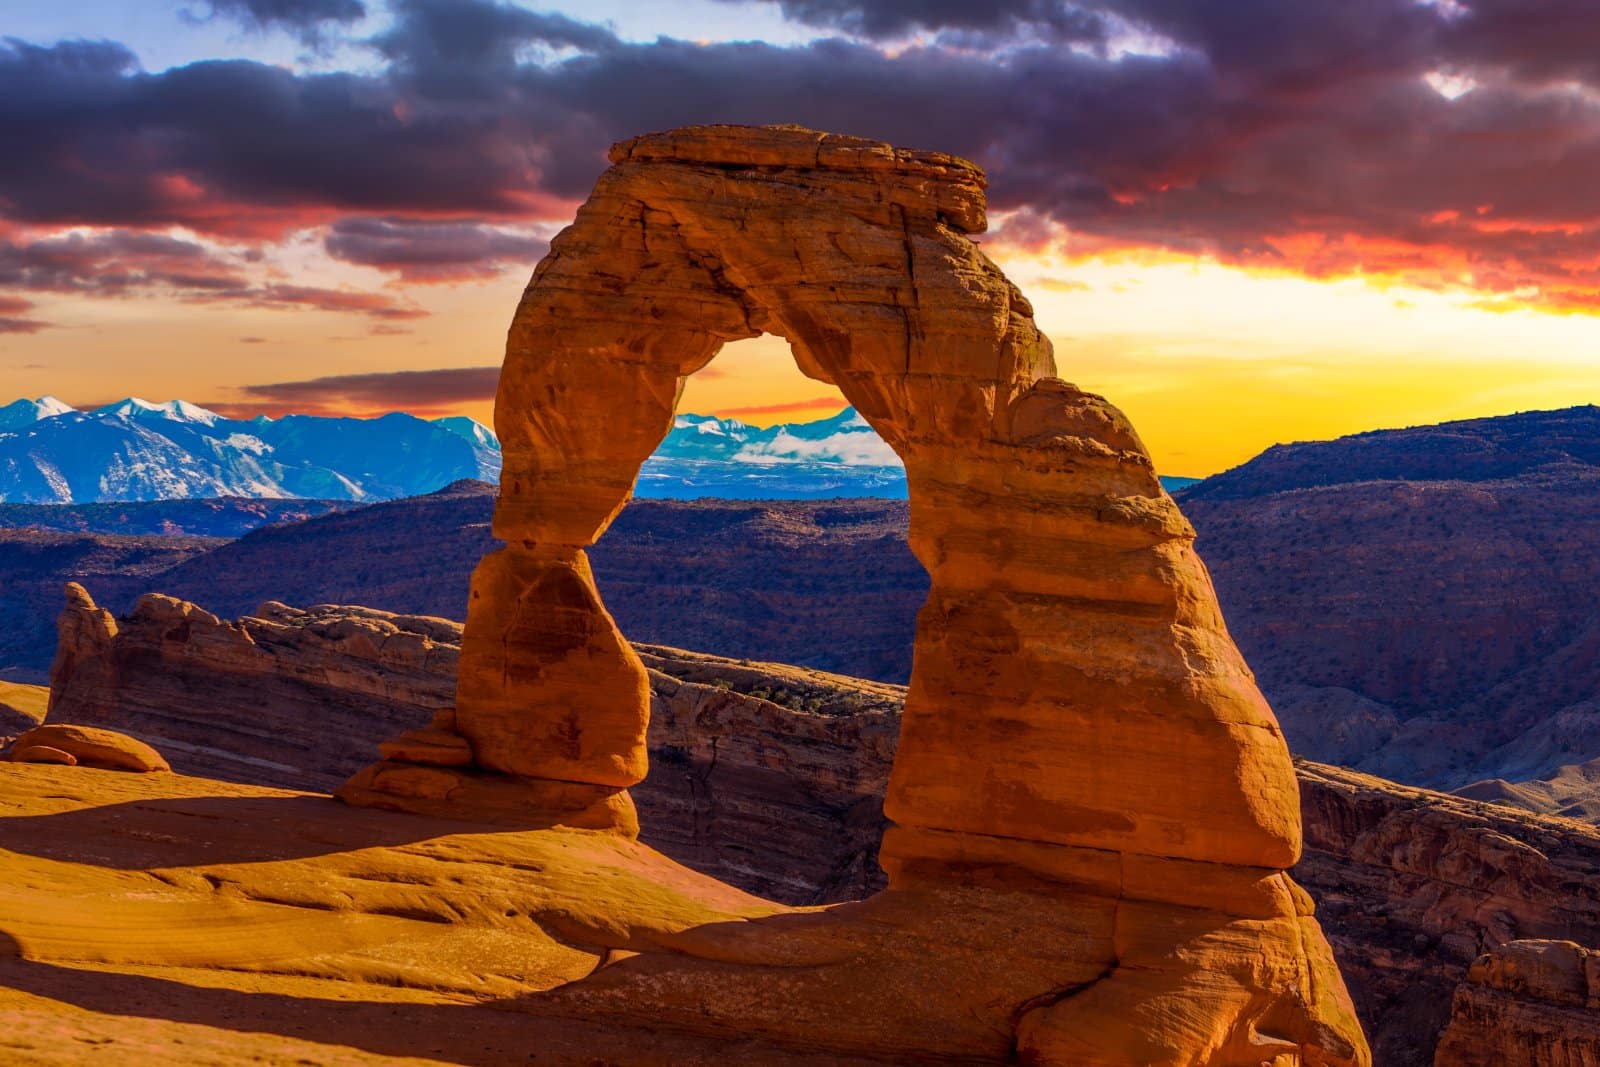 <p><span>Embark on an outdoor adventure in Moab, with its red rock canyons, towering arches, and desert landscapes that rival the natural wonders of the Australian Outback and African savannas.</span></p>